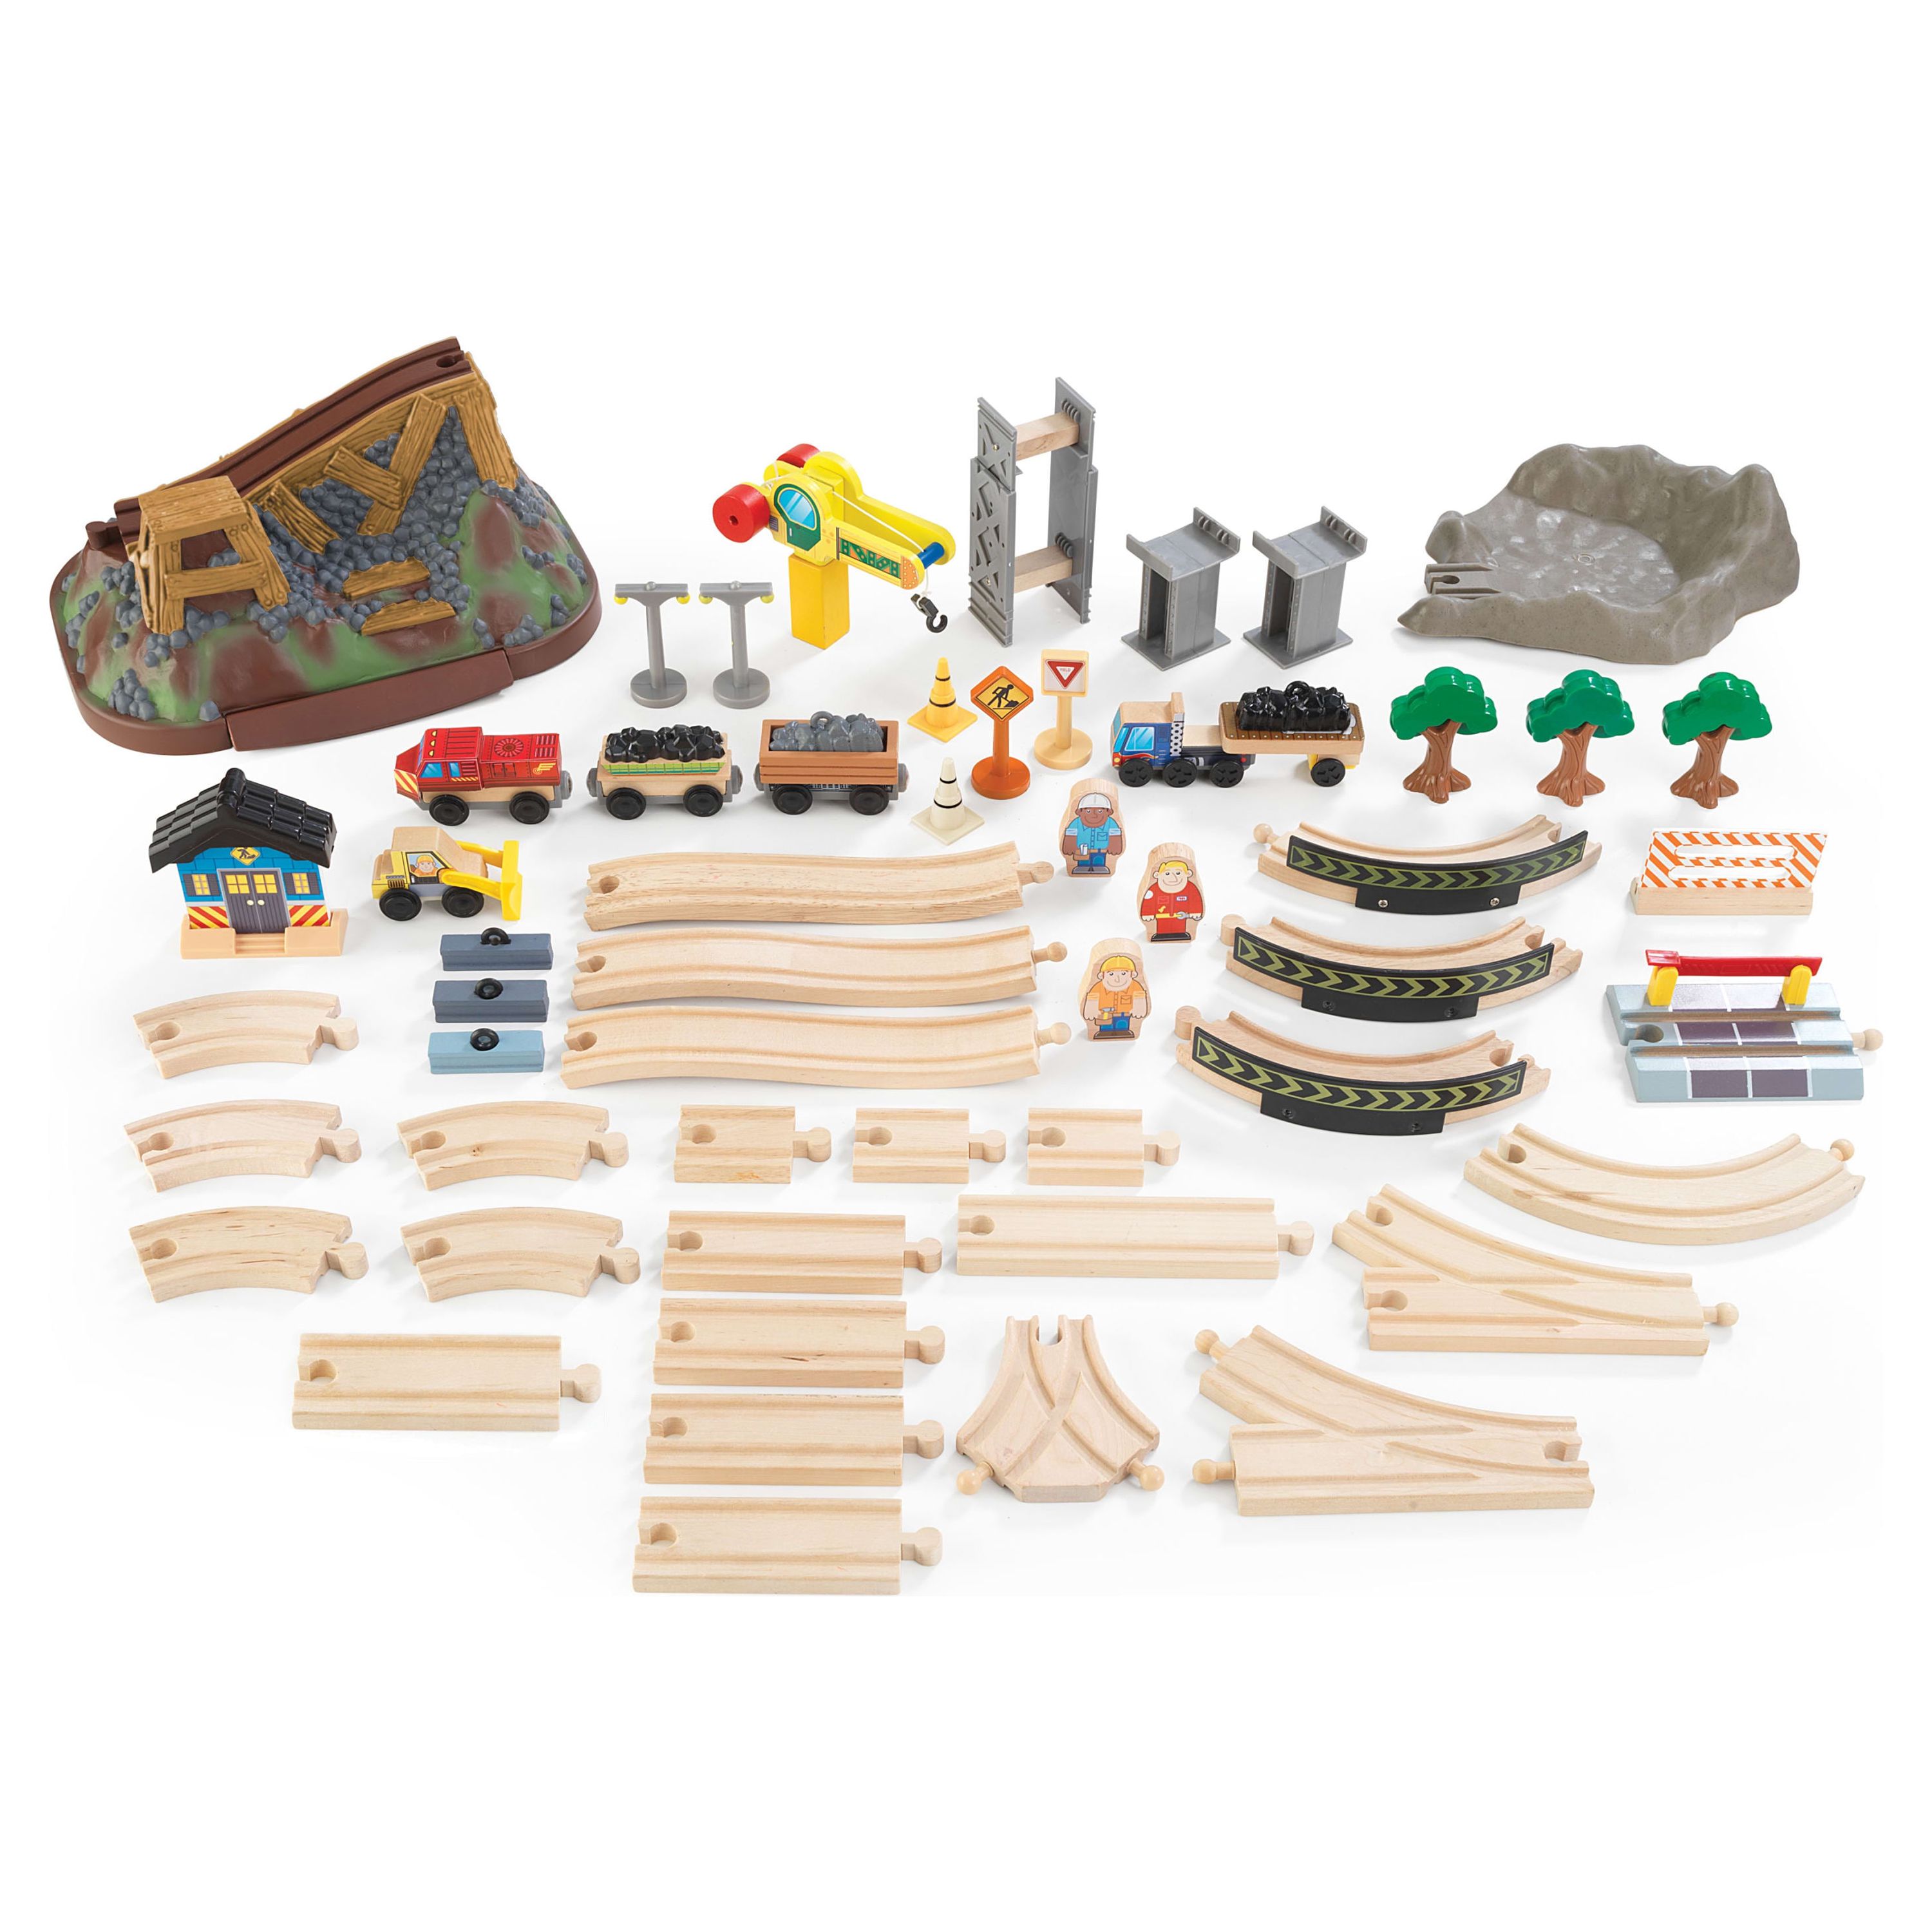 KidKraft Bucket Top Construction Wood Train Set with Crane & 61 Pieces, For Ages 3+ - image 4 of 7